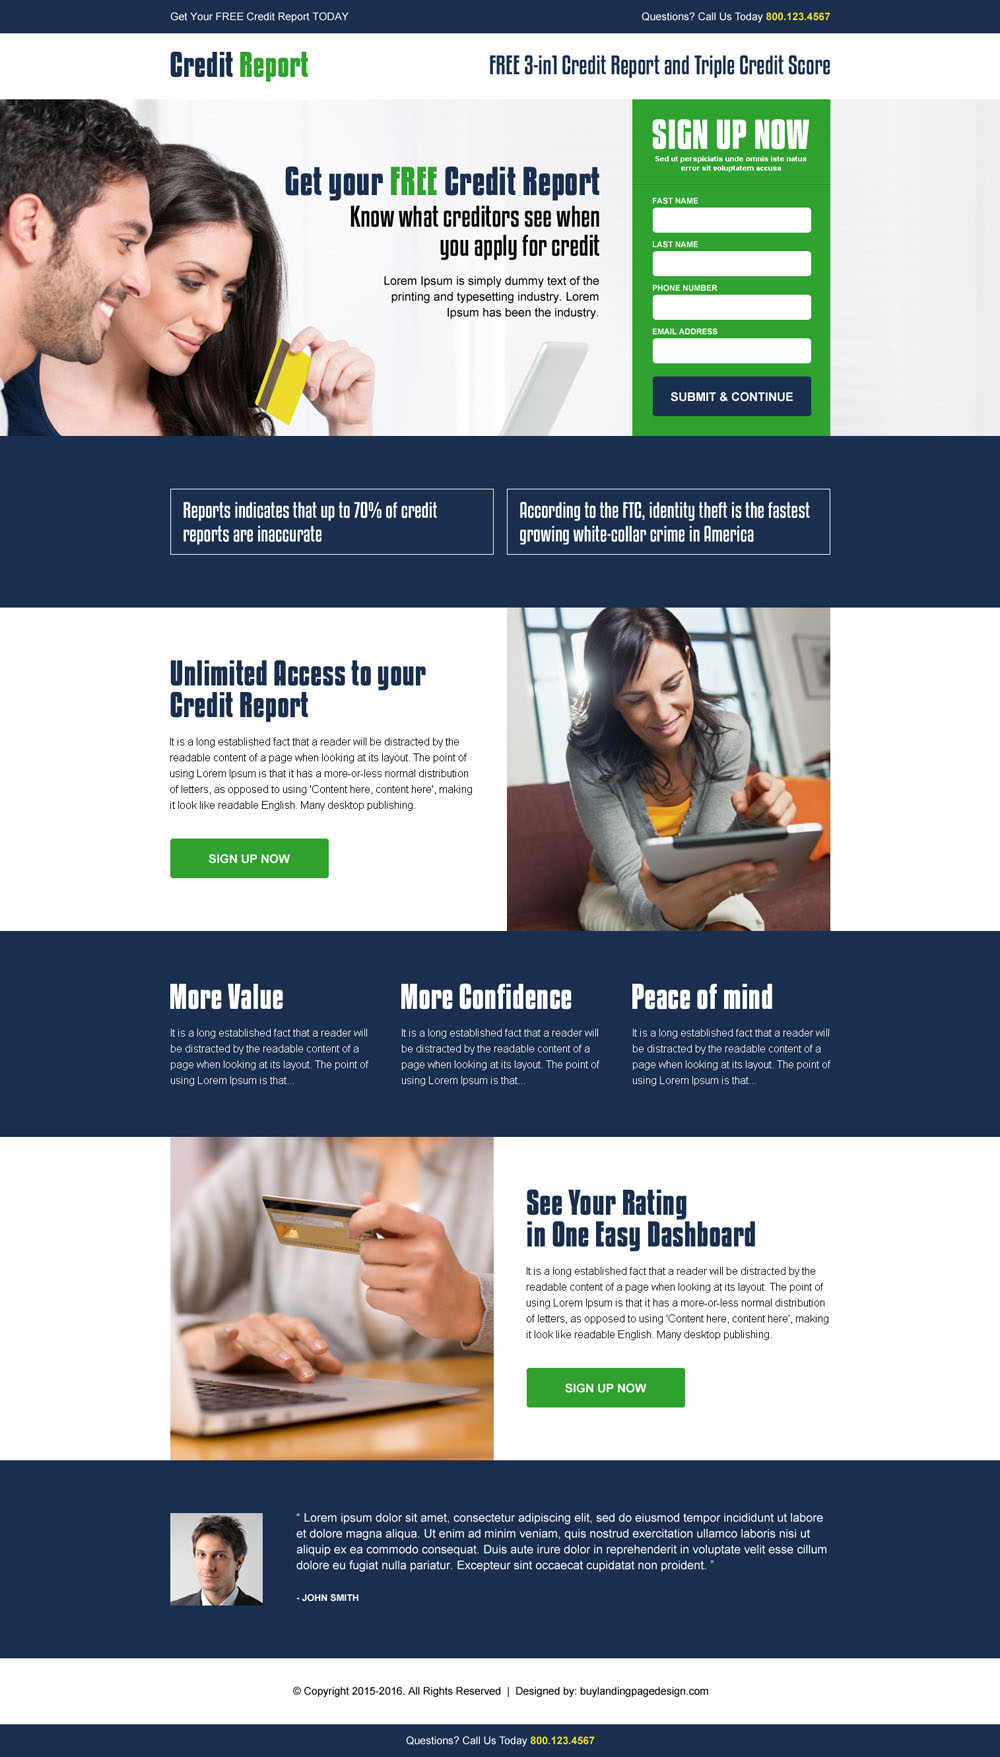 get-your-free-credit-report-lead-generation-converting-landing-page-design-003